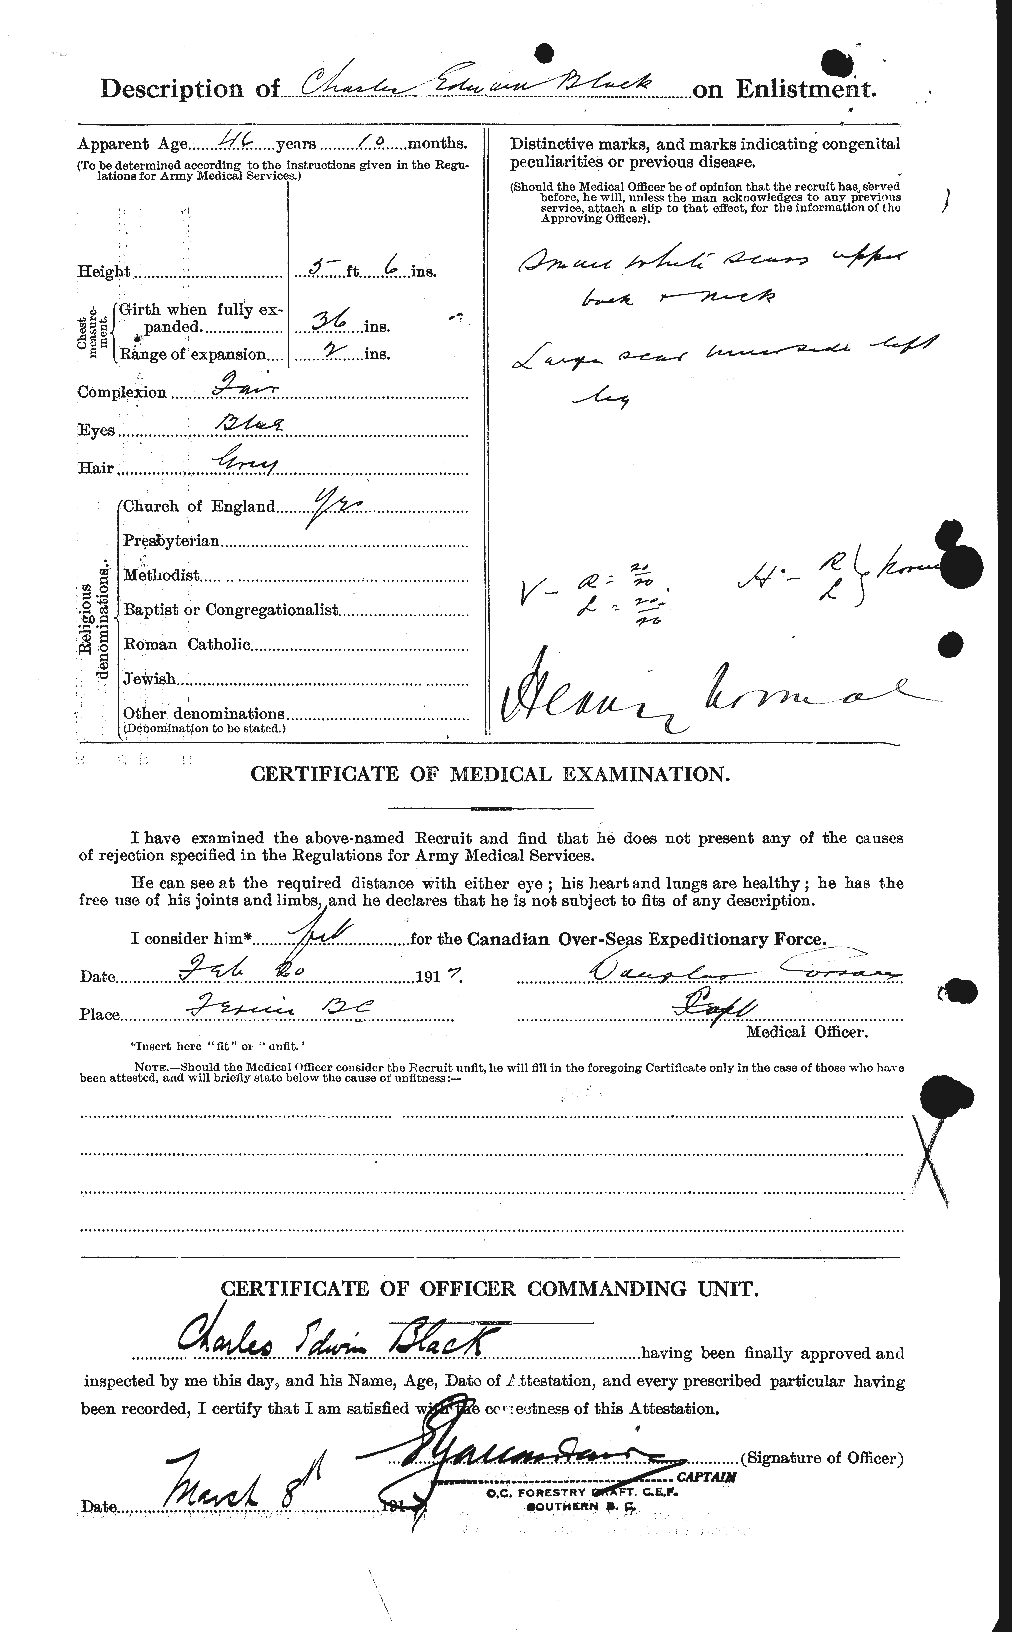 Personnel Records of the First World War - CEF 241238b